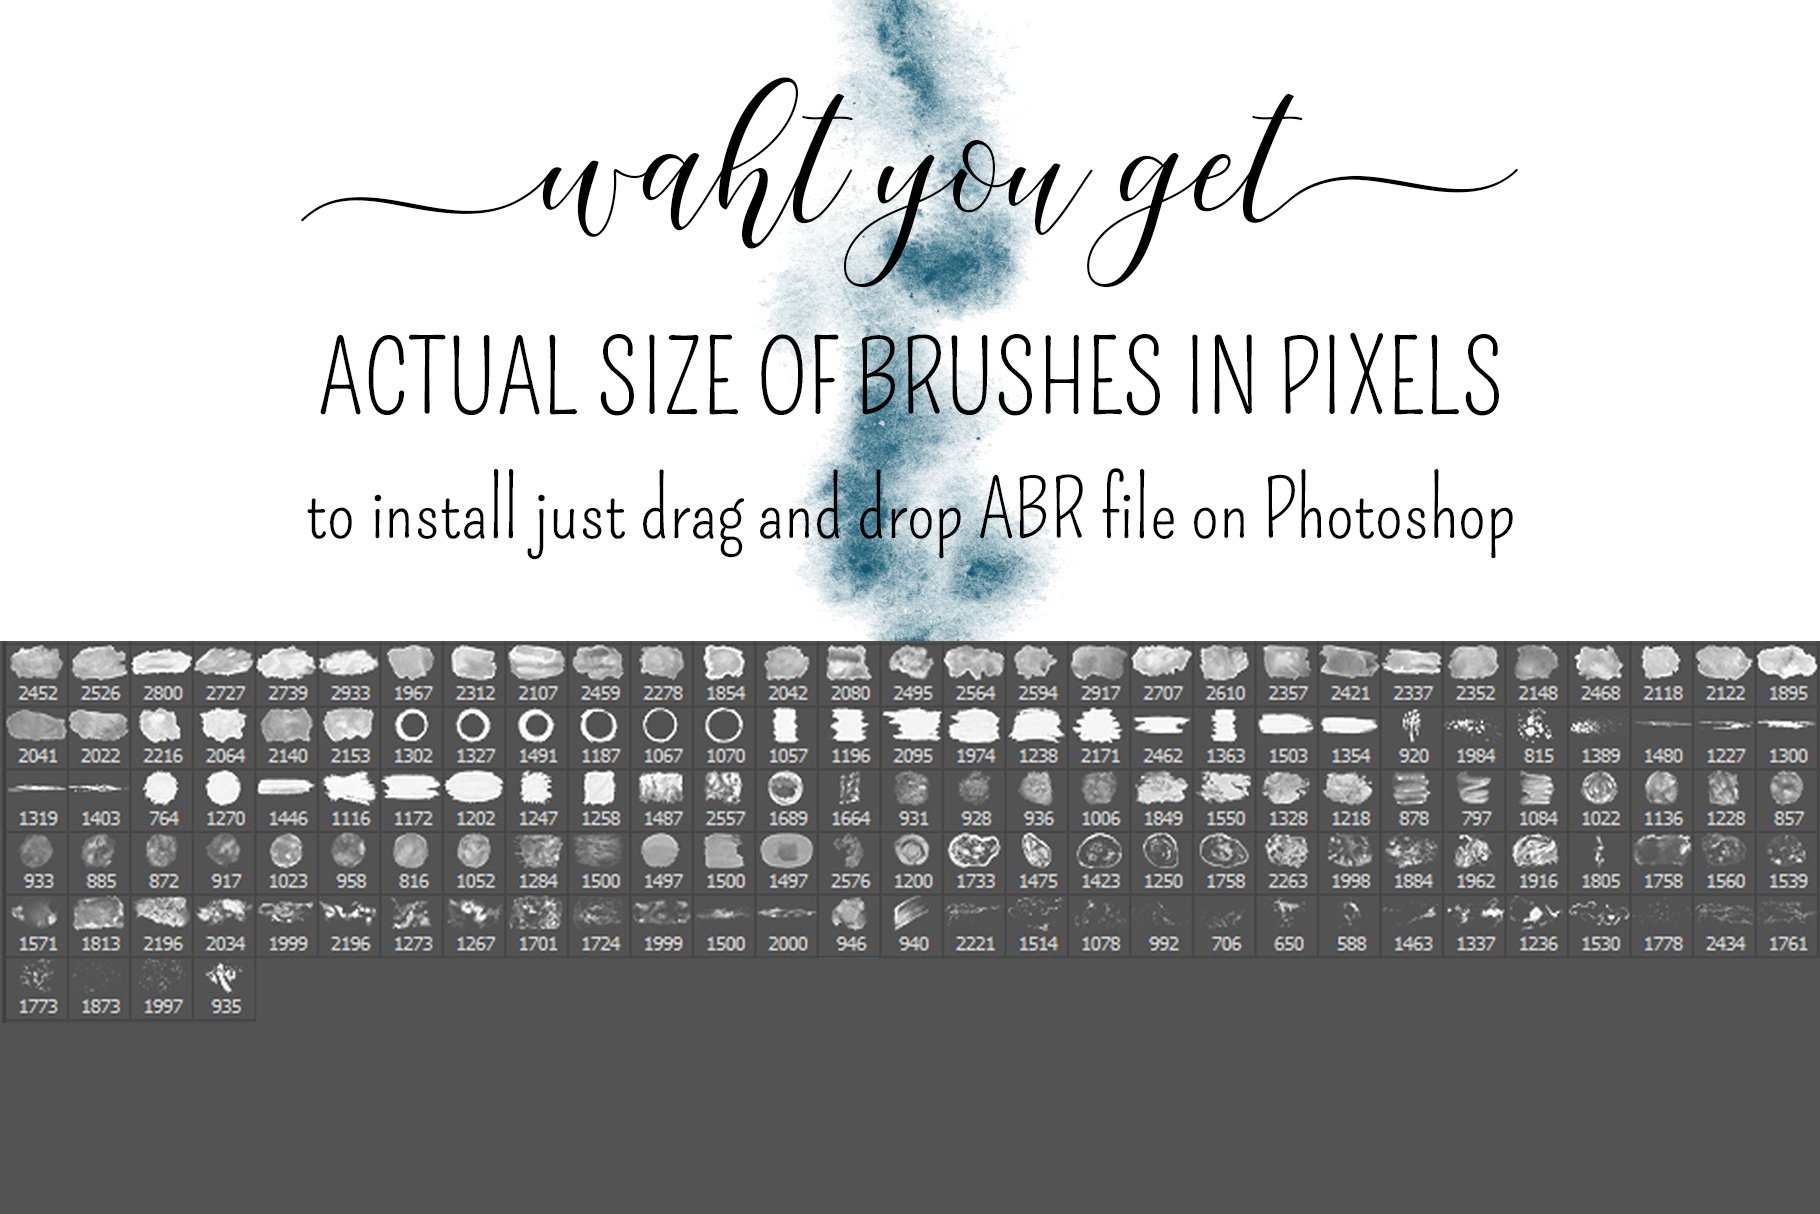 150 Watercolor Photoshop Brushes Setpreview image.